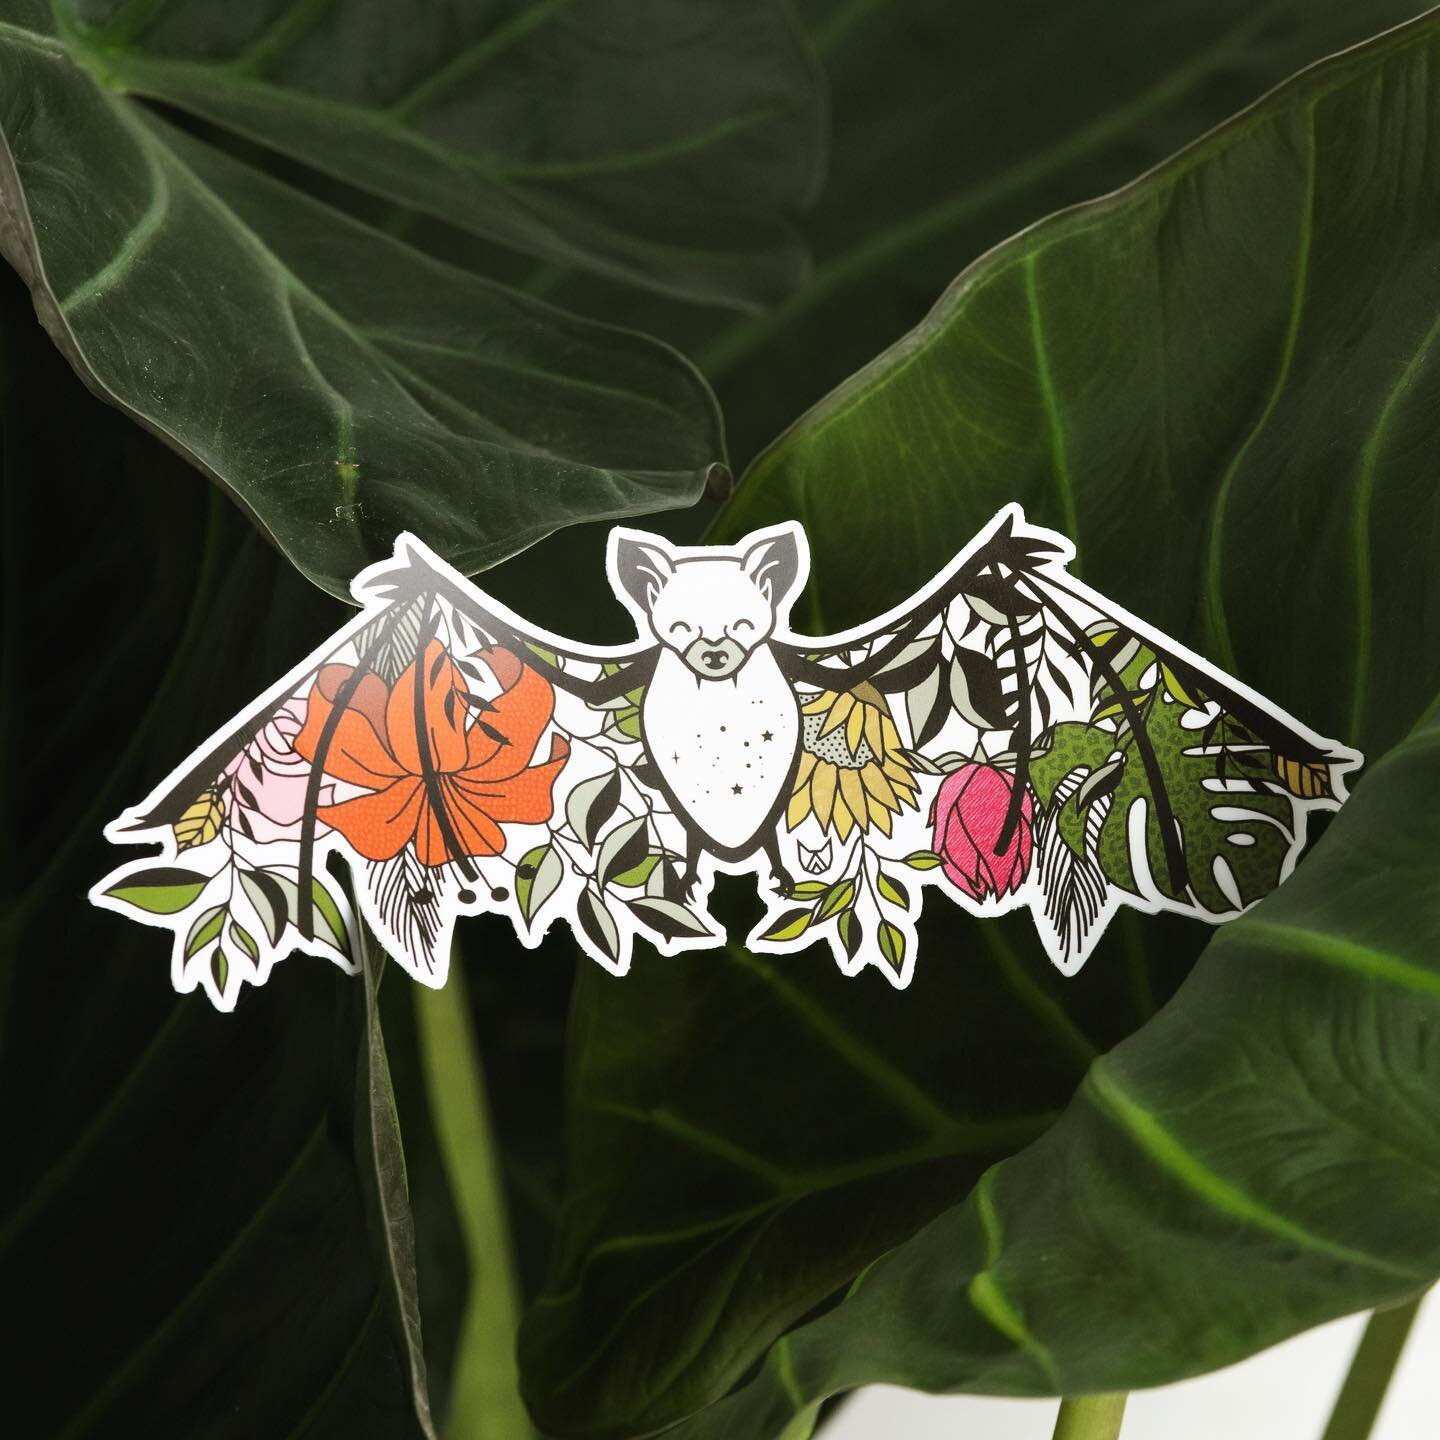 Just a friendly reminder as we scoot in spring/summer that bats are pollinators too! Be kind to these little cuties. They pollinate the flowers you like to watch grow all summer long. 🦇🖤🦇
&bull;
&bull;
&bull;
&bull;
&bull;
&bull;
#planttherapy #in